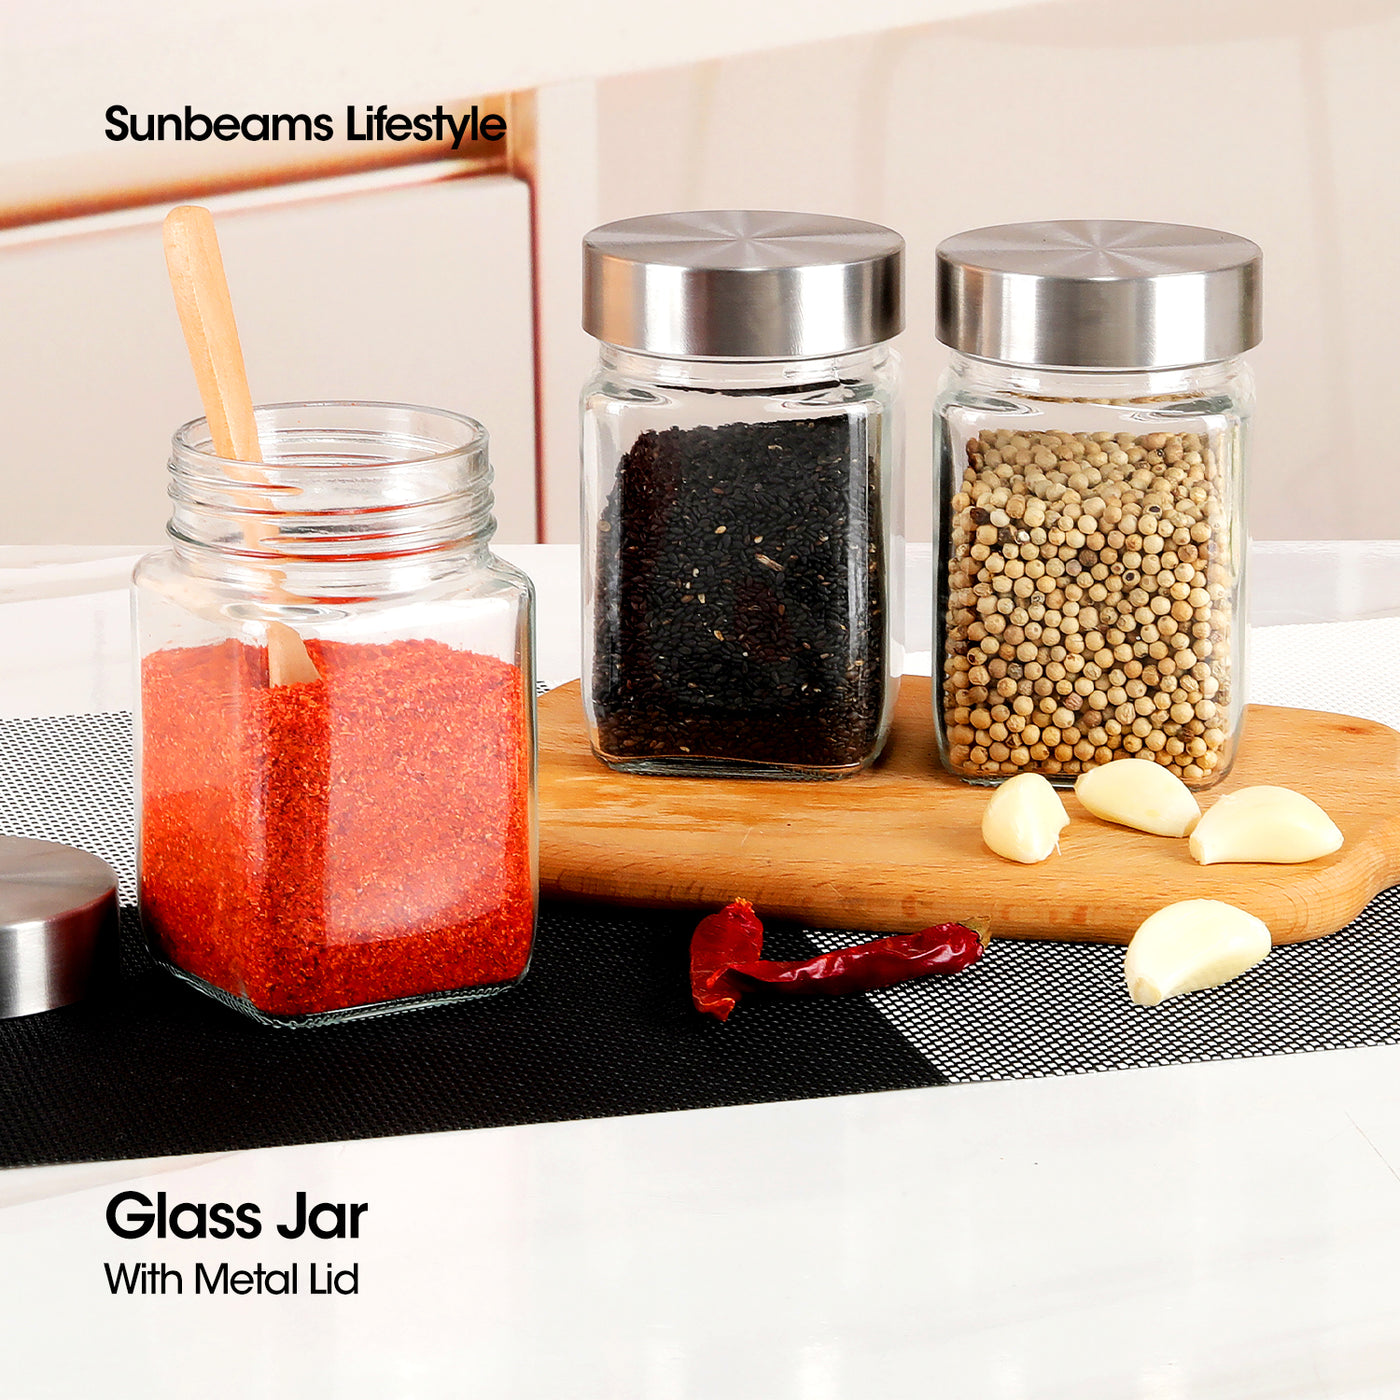 SLIQUE Premium Glass Jar w/ Stainless Steel Lid Airtight 300ml|0.3L Set of 3  Storage Essentials Amazing Gift Idea For Any Occasion!